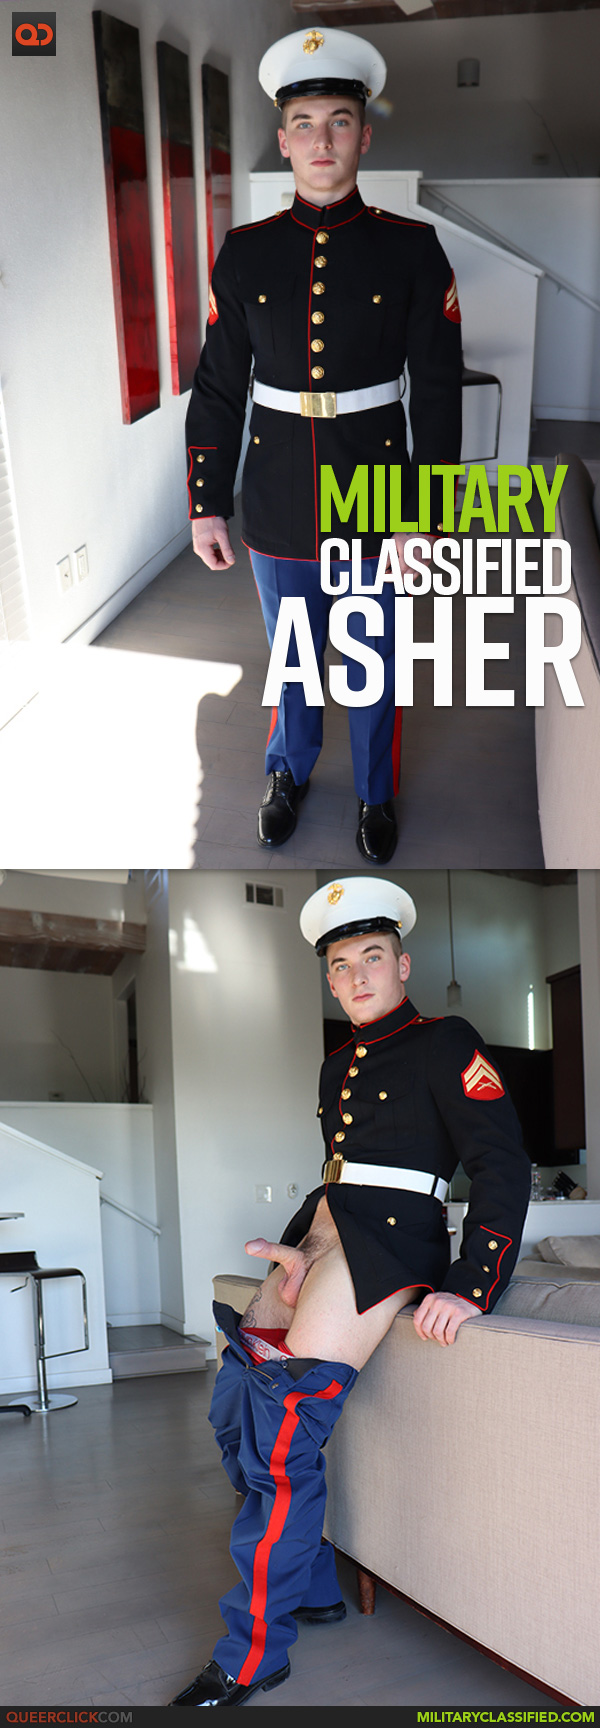 Military Classified: Asher